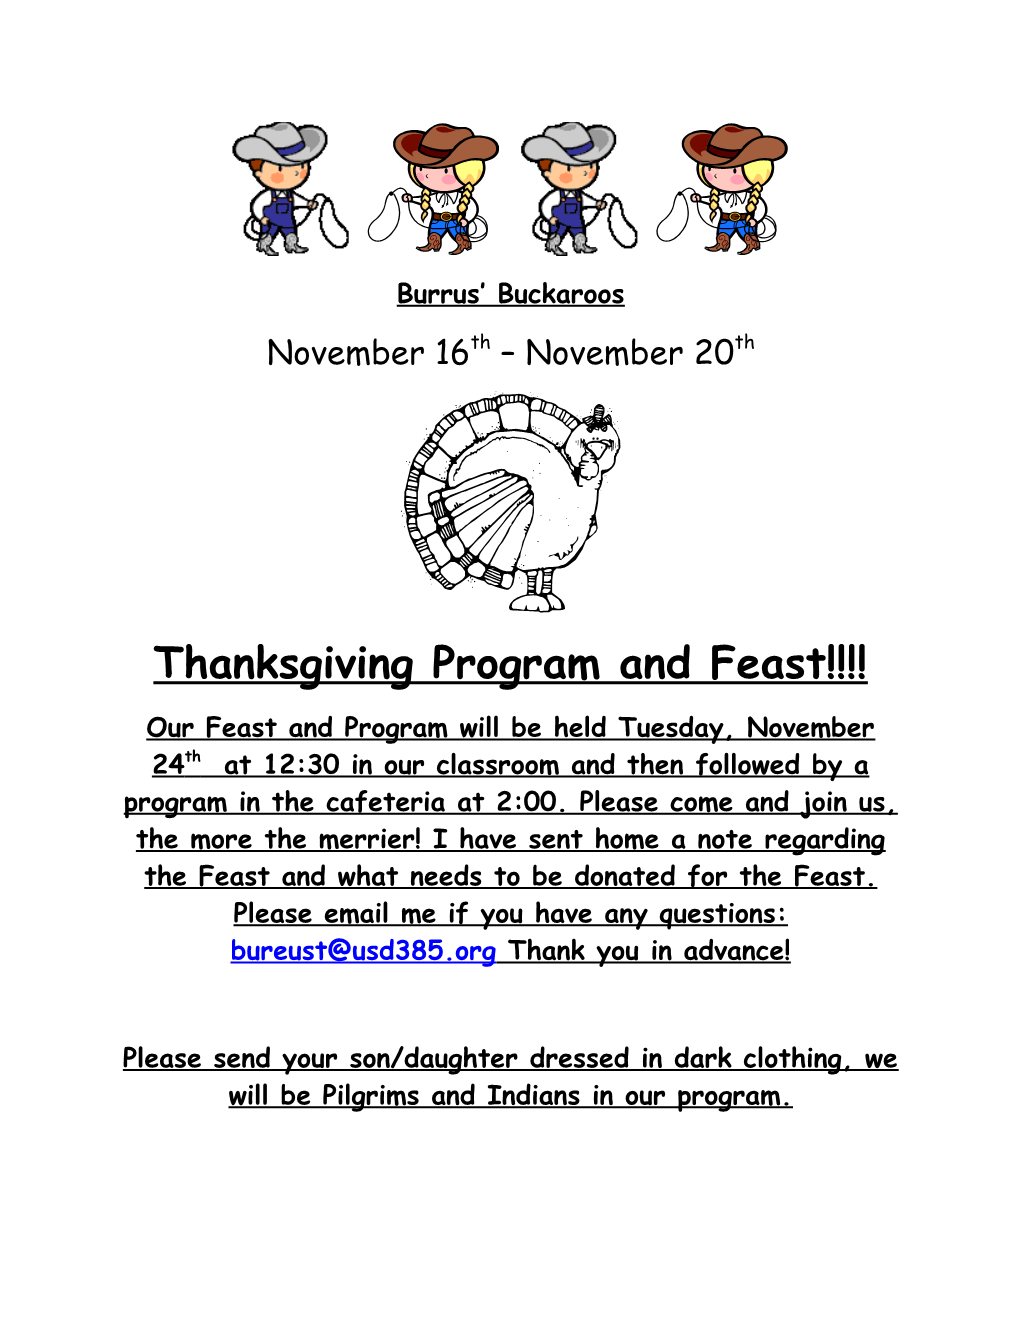 Thanksgiving Program and Feast